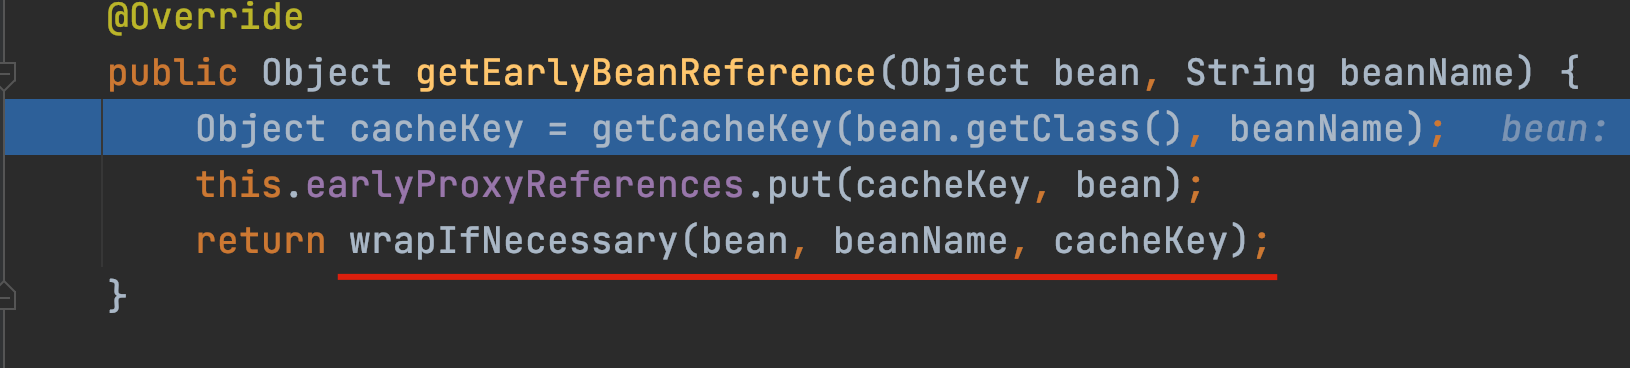 getEarlyBeanReference